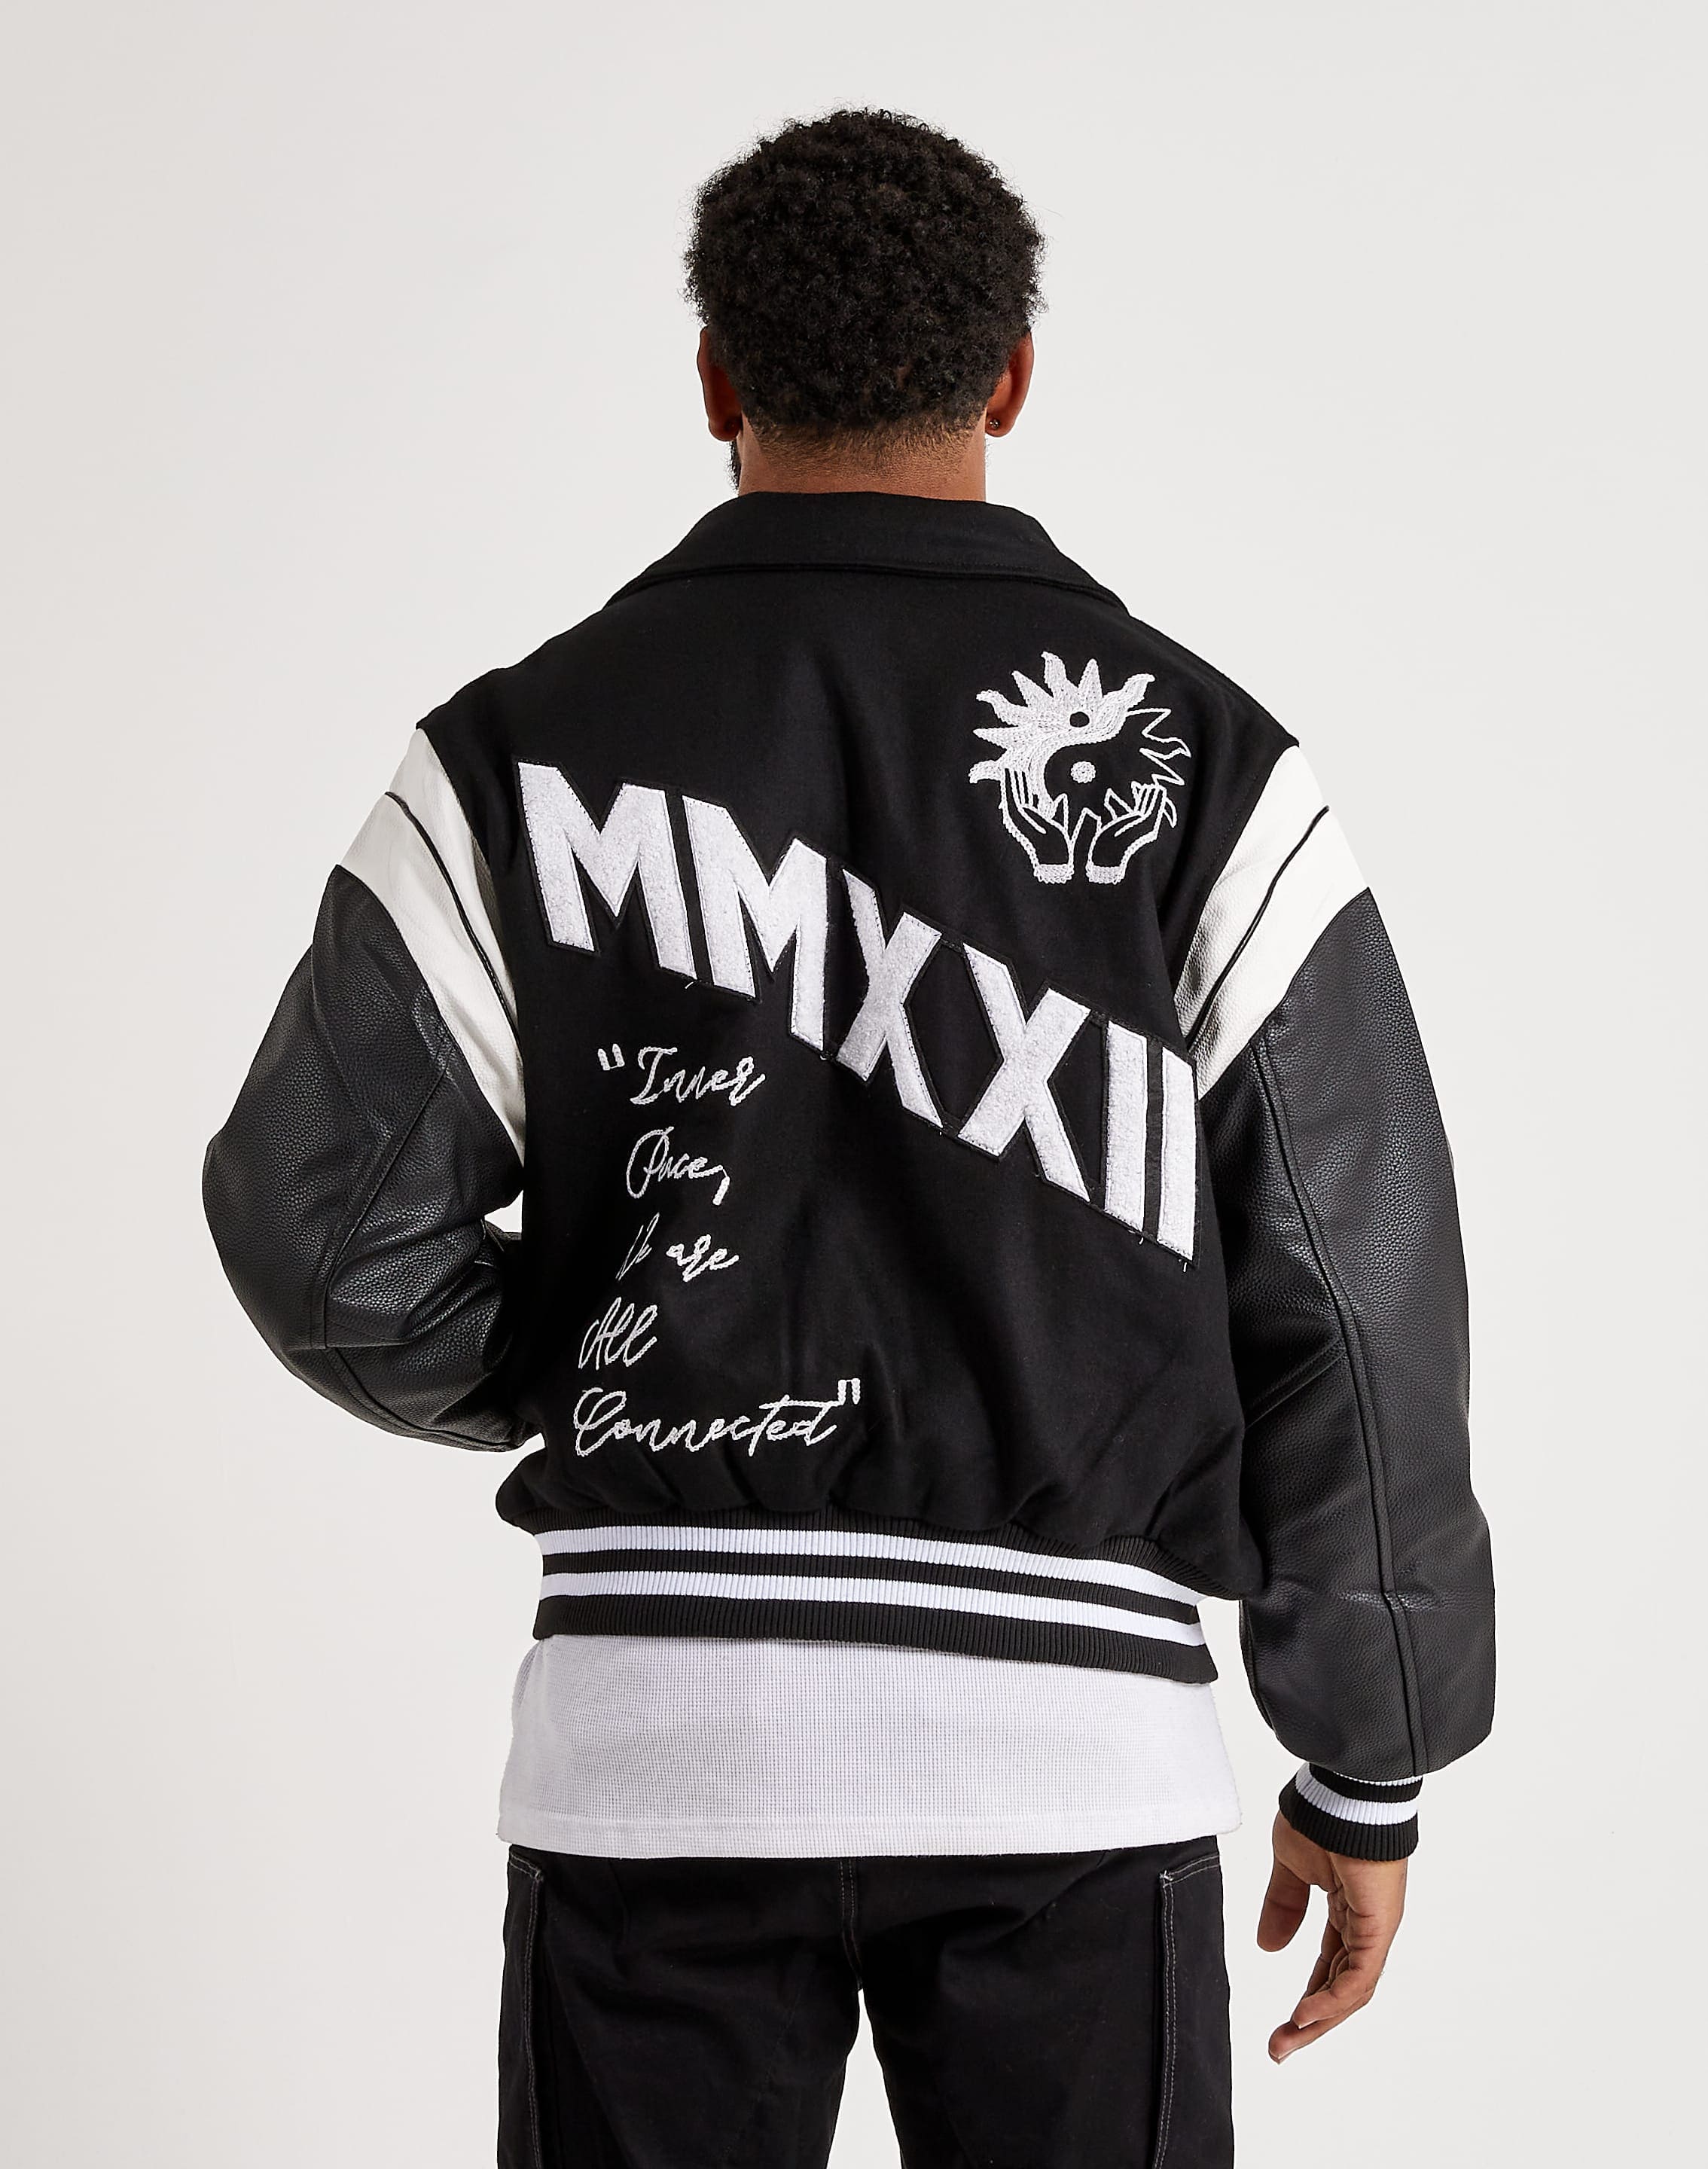 Pretty sure the Escape Plan video jacket is an old varsity letter jacket  from my high school in MN. Not sure how Travis would have gotten one though  : r/travisscott